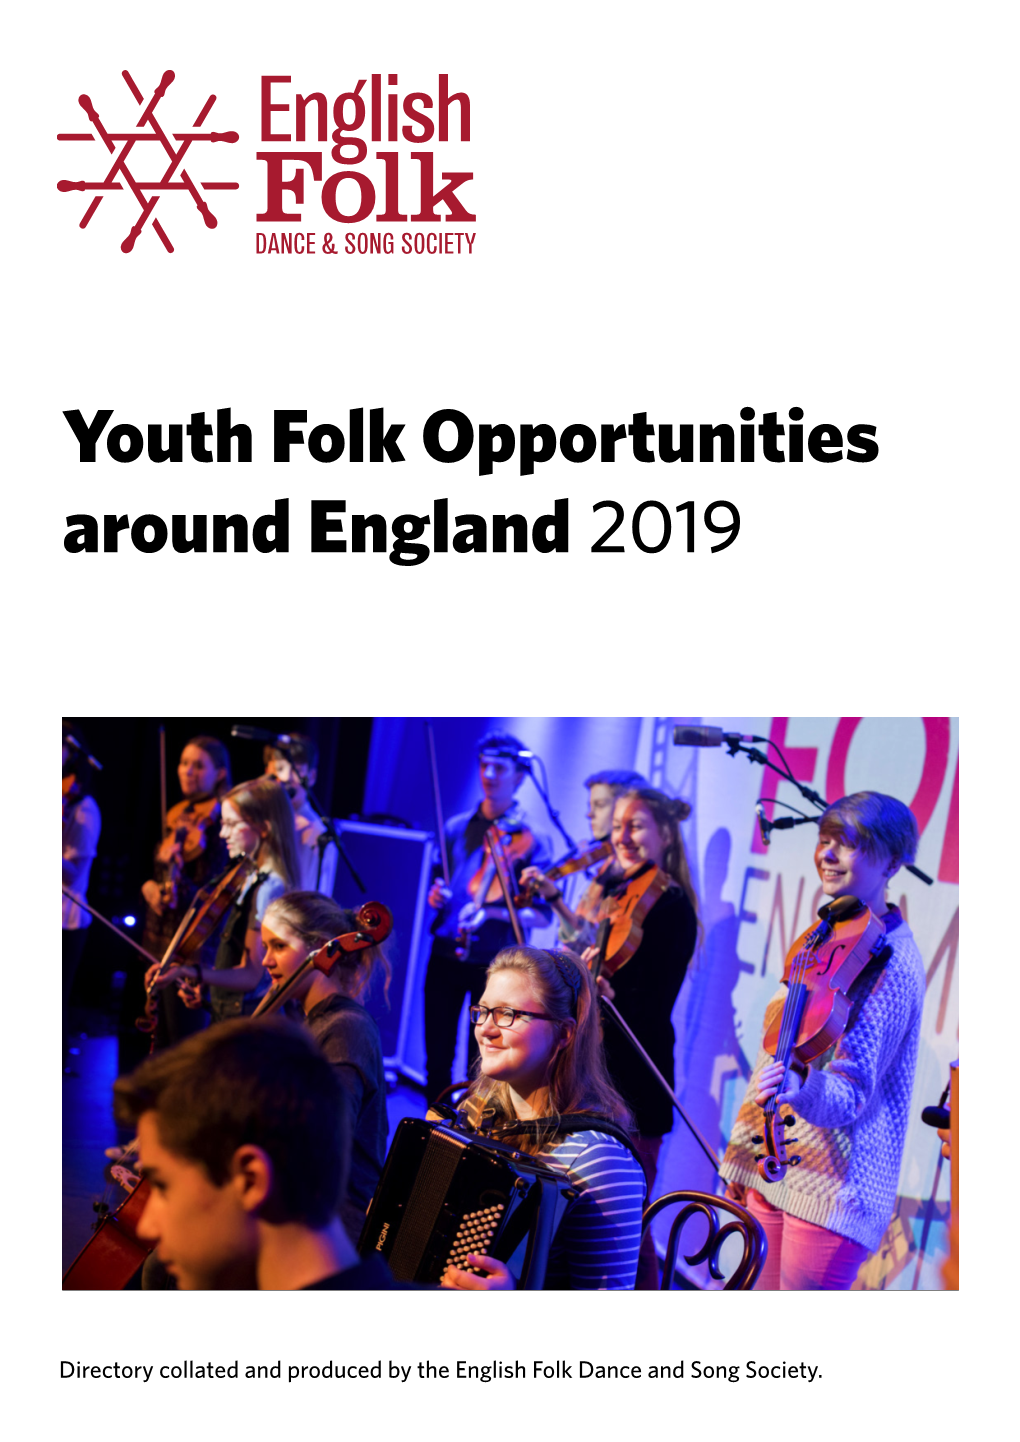 Youth Folk Opportunities Around England 2019